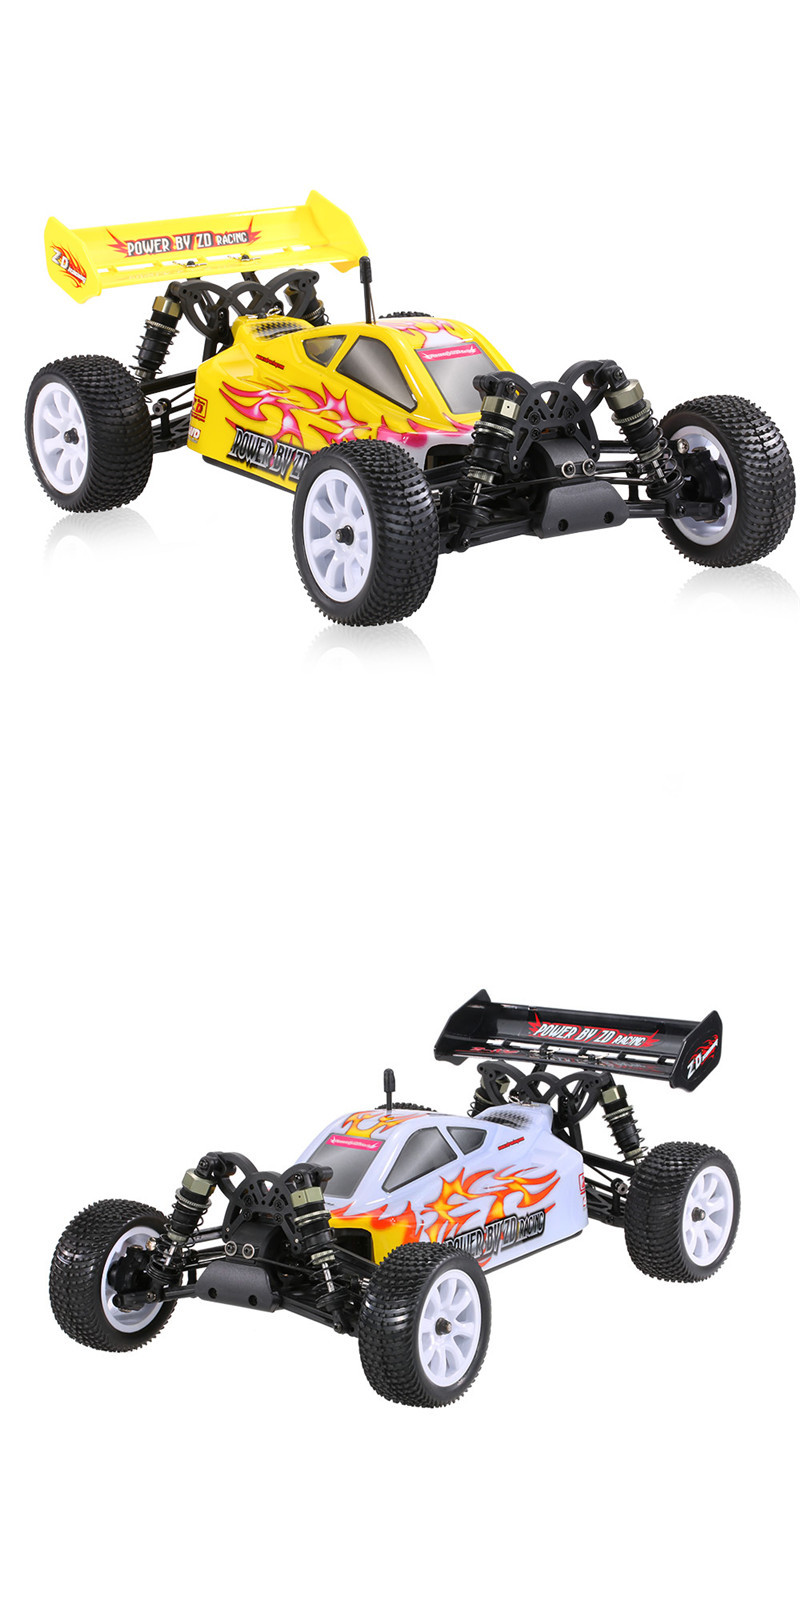 ZD-Racing-9102-Thunder-B-10E-DIY-Car-Kit-24G-4WD-110-Scale-RC-Off-Road-Buggy-Without-Electronic-Part-1201985